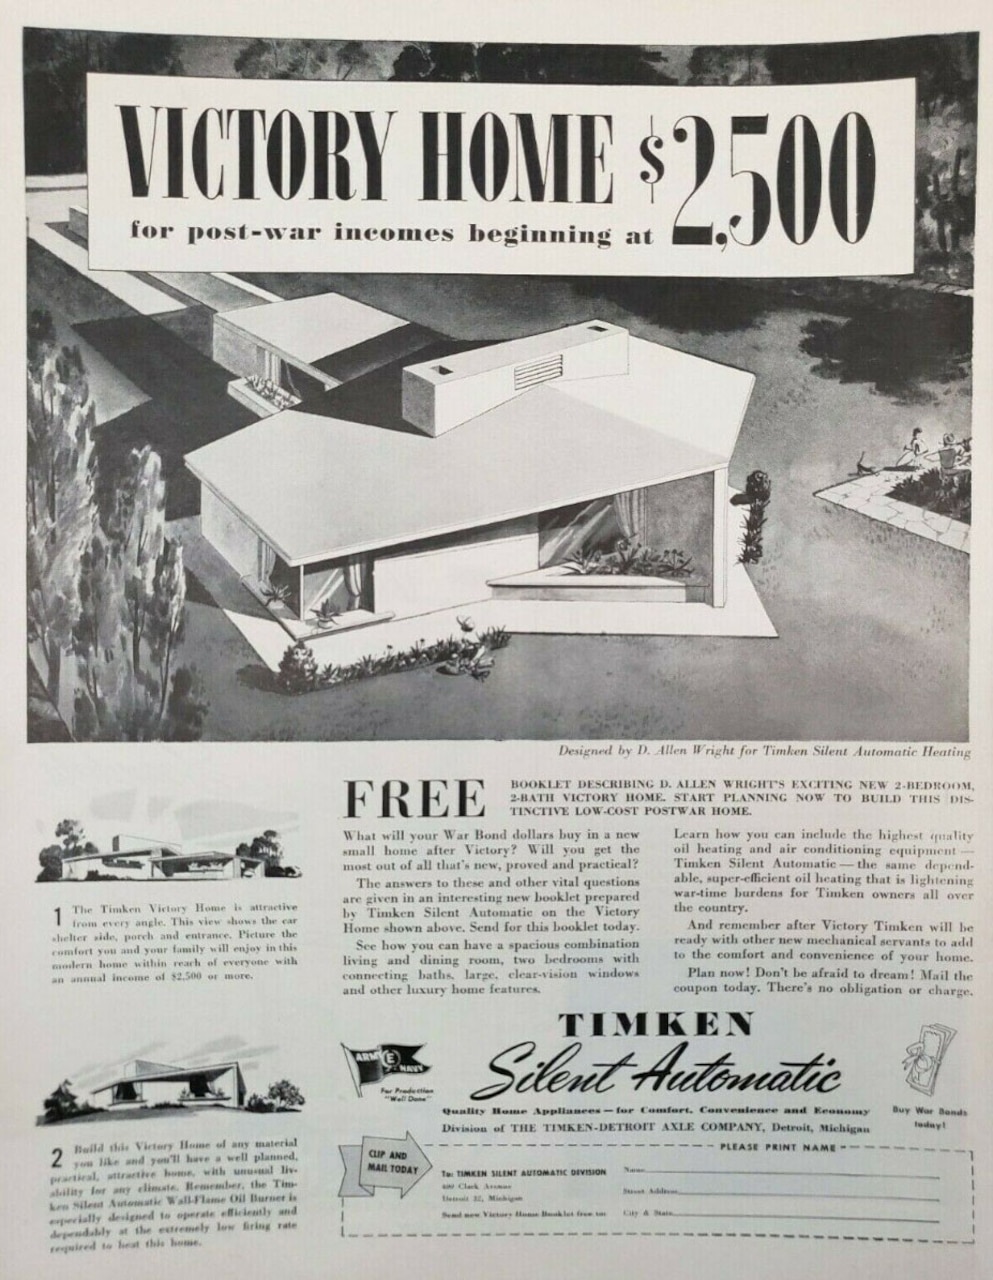 “Victory Home” advertisement, ca. 1943. This full-page flyer doubled as an advertisement for Timken Silent Automatic Heating and home builder D. Allen Wright’s two-bedroom, two-bathroom victory home, encouraging prospective buyers to “start planning now to build this distinctive low-cost postwar home.”